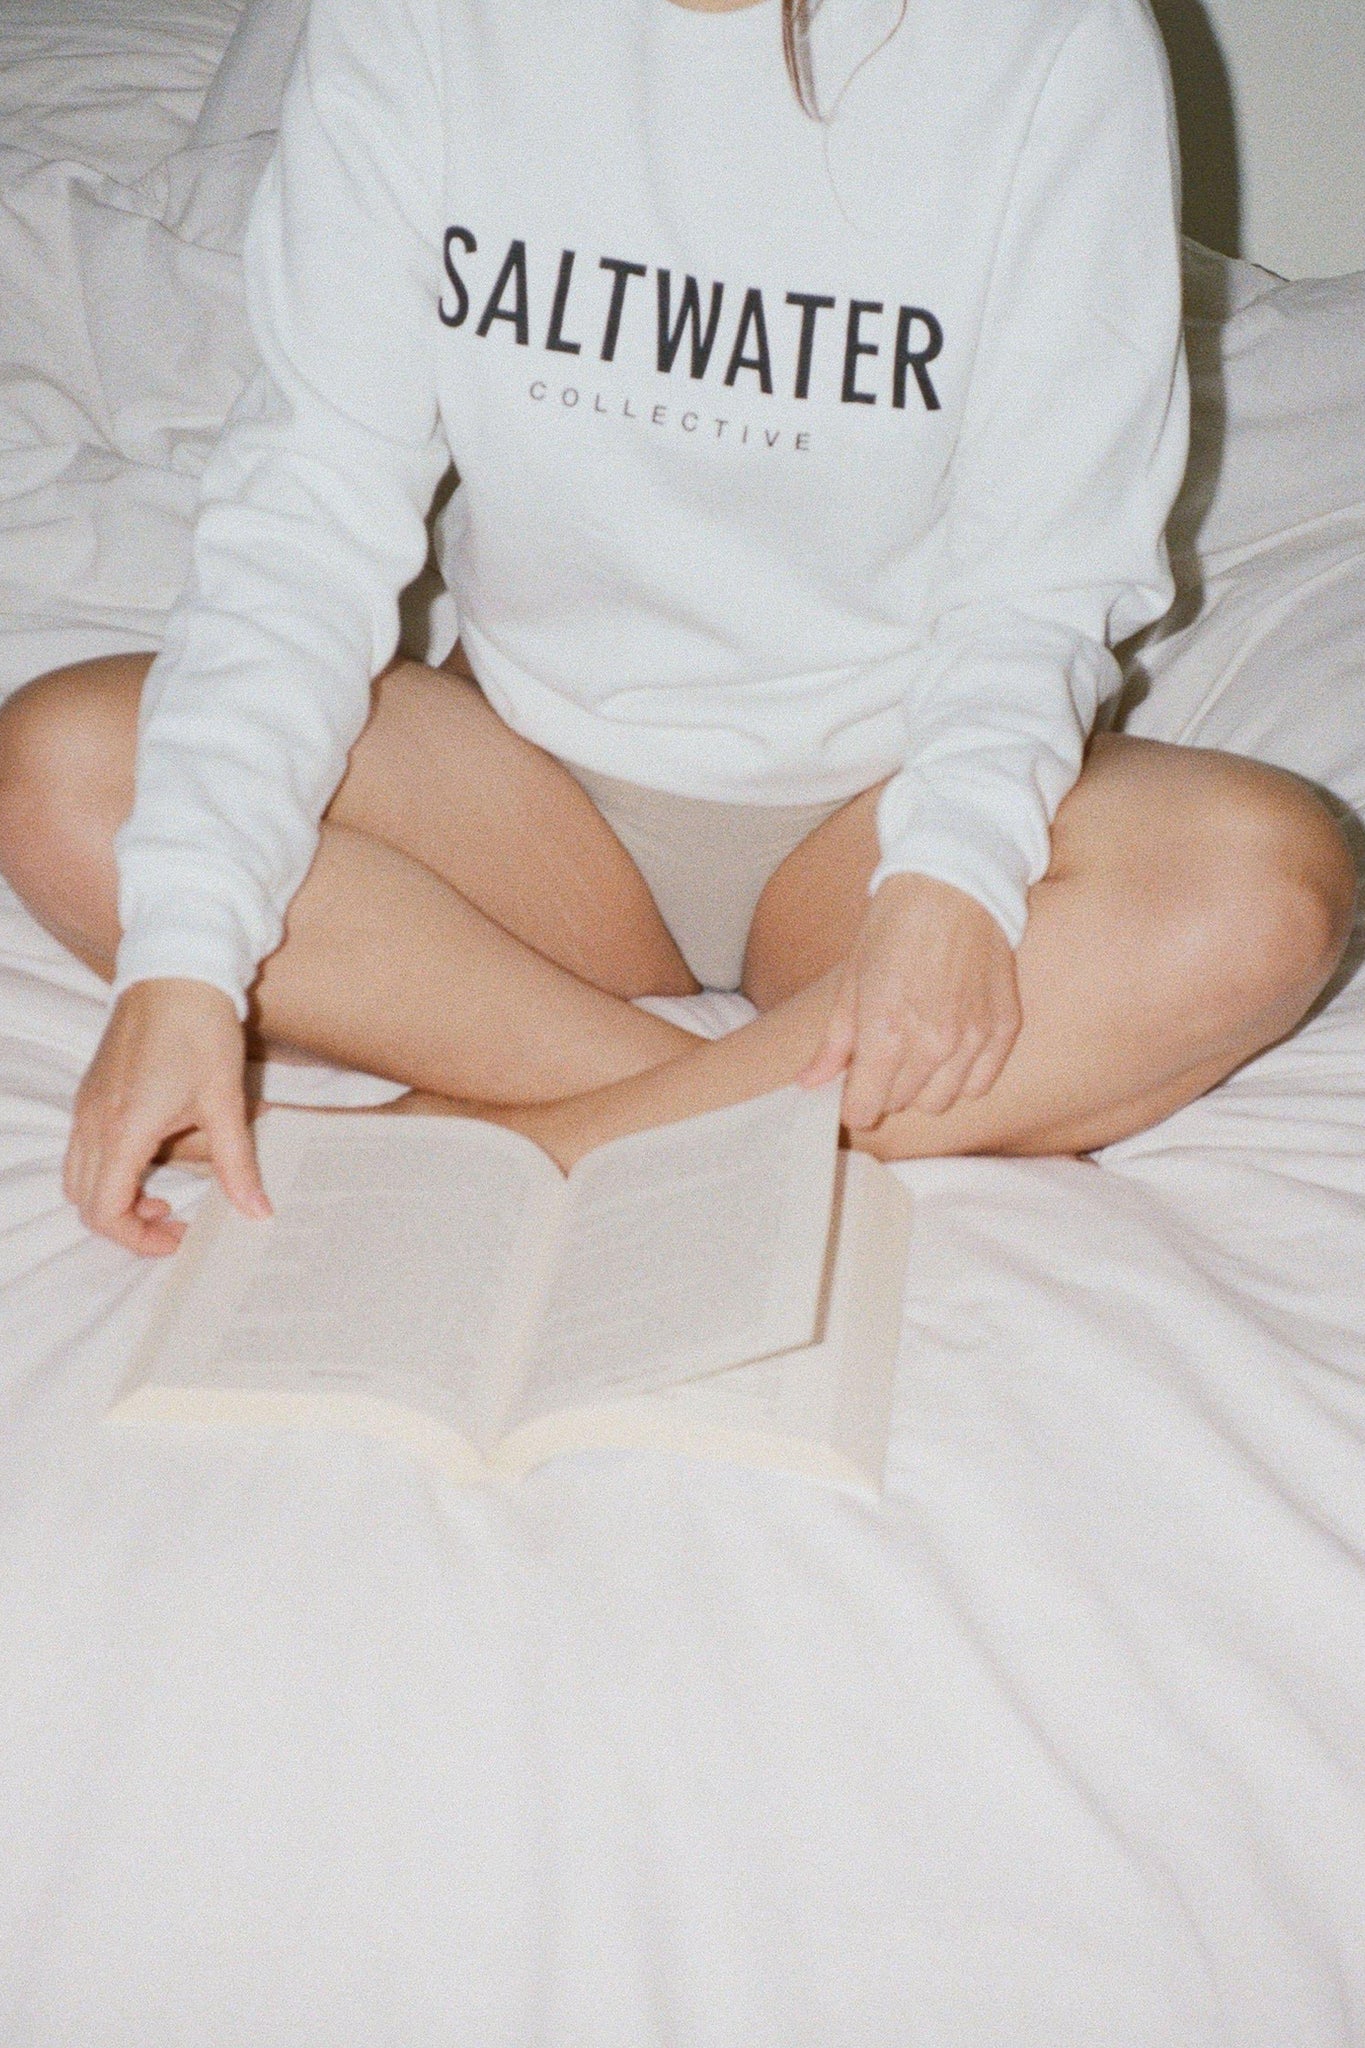 A close up of a woman holding a book while sitting on a bed wearing a white crewneck sweatshirt with a SALTWATER logo printed across the chest in black.